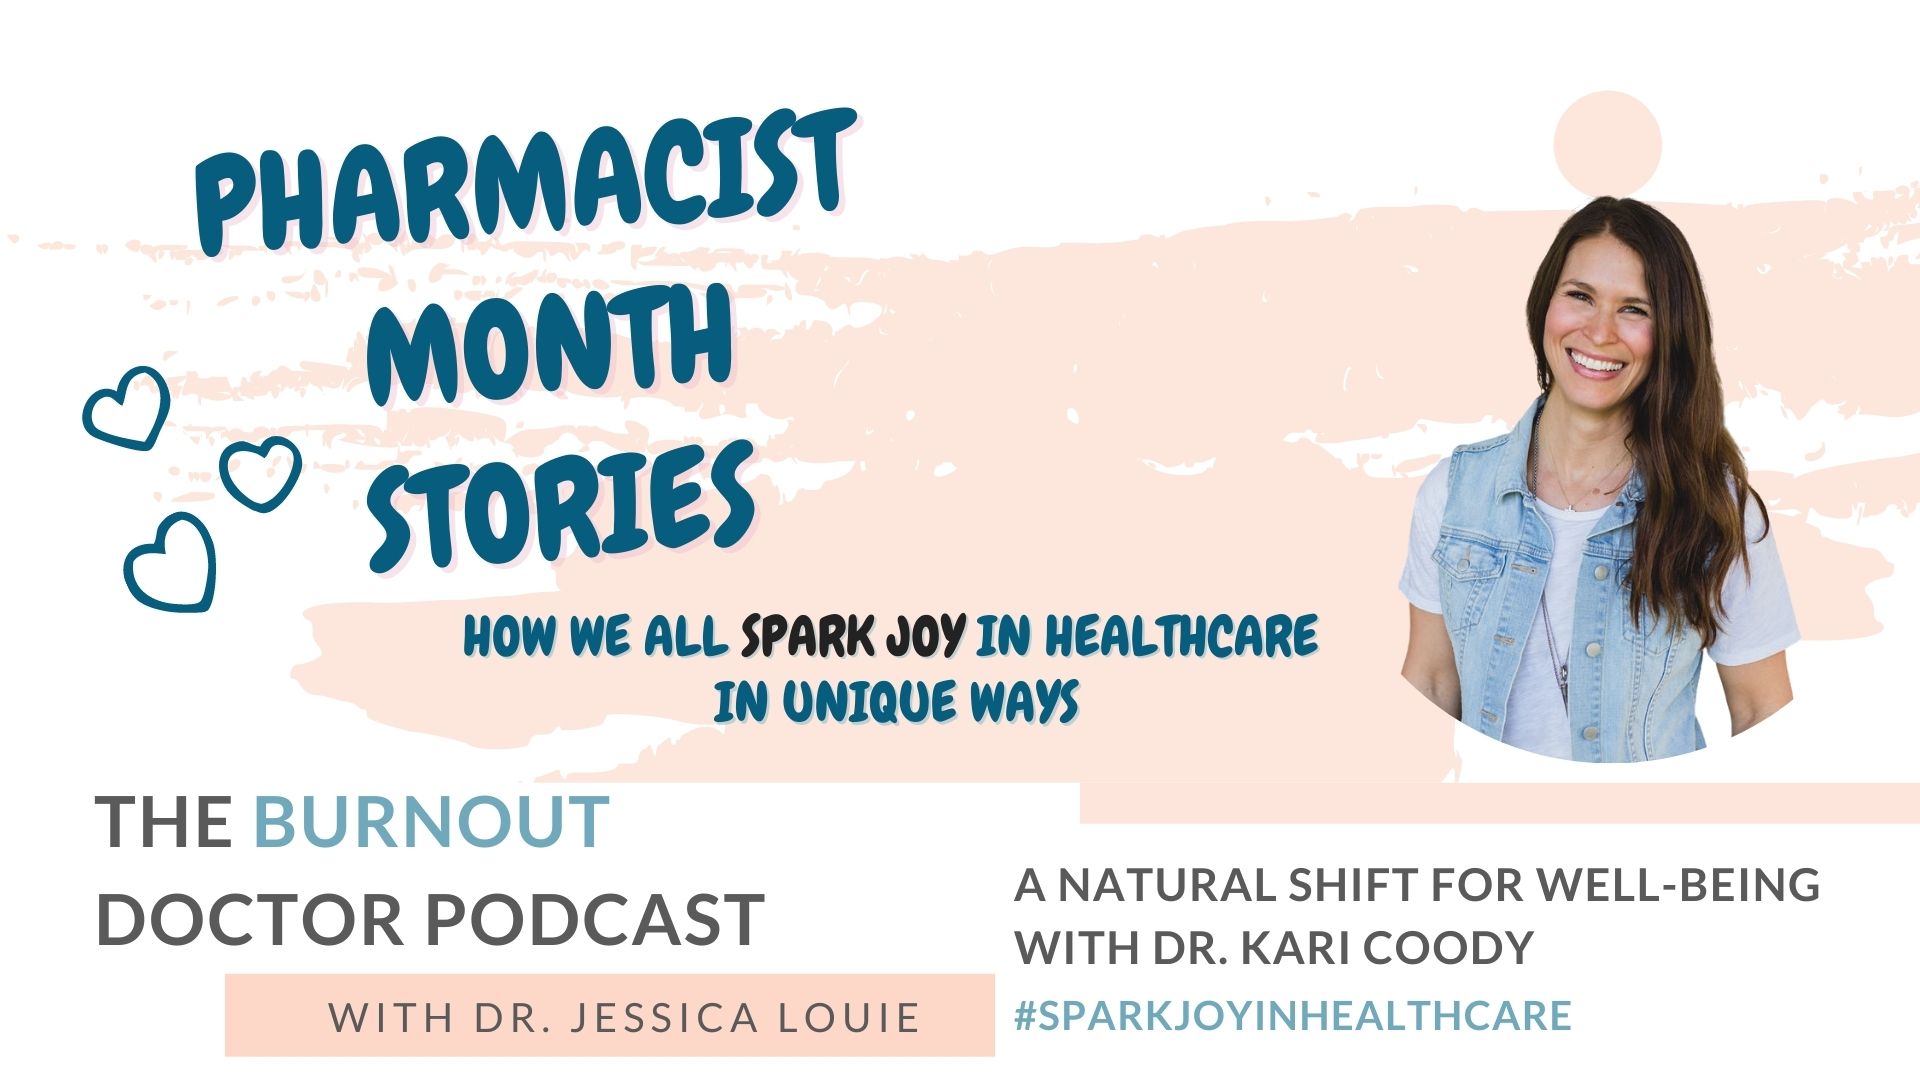 Dr. Kari Coody on The Burnout Doctor Podcast with Dr. Jessica Louie. Pharmacist burnout stories. Making a natural shift to essential oils and functional medicine pharmacist. Spark Joy in Healthcare. #joyatwork